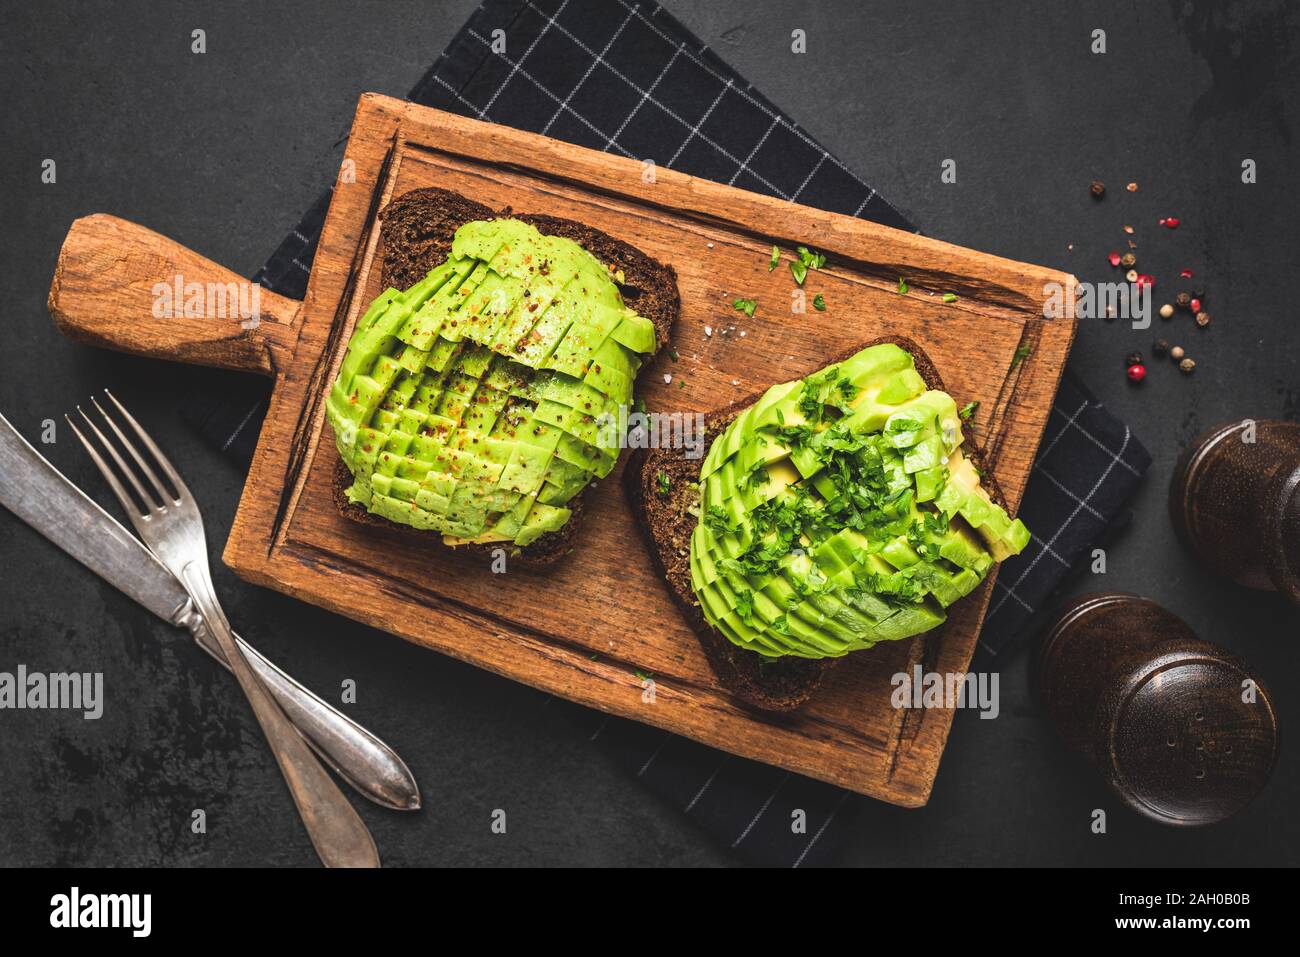 Rye bread toast with avocado and herbs on wooden board, black background. Table top view. Healthy vegan food Stock Photo